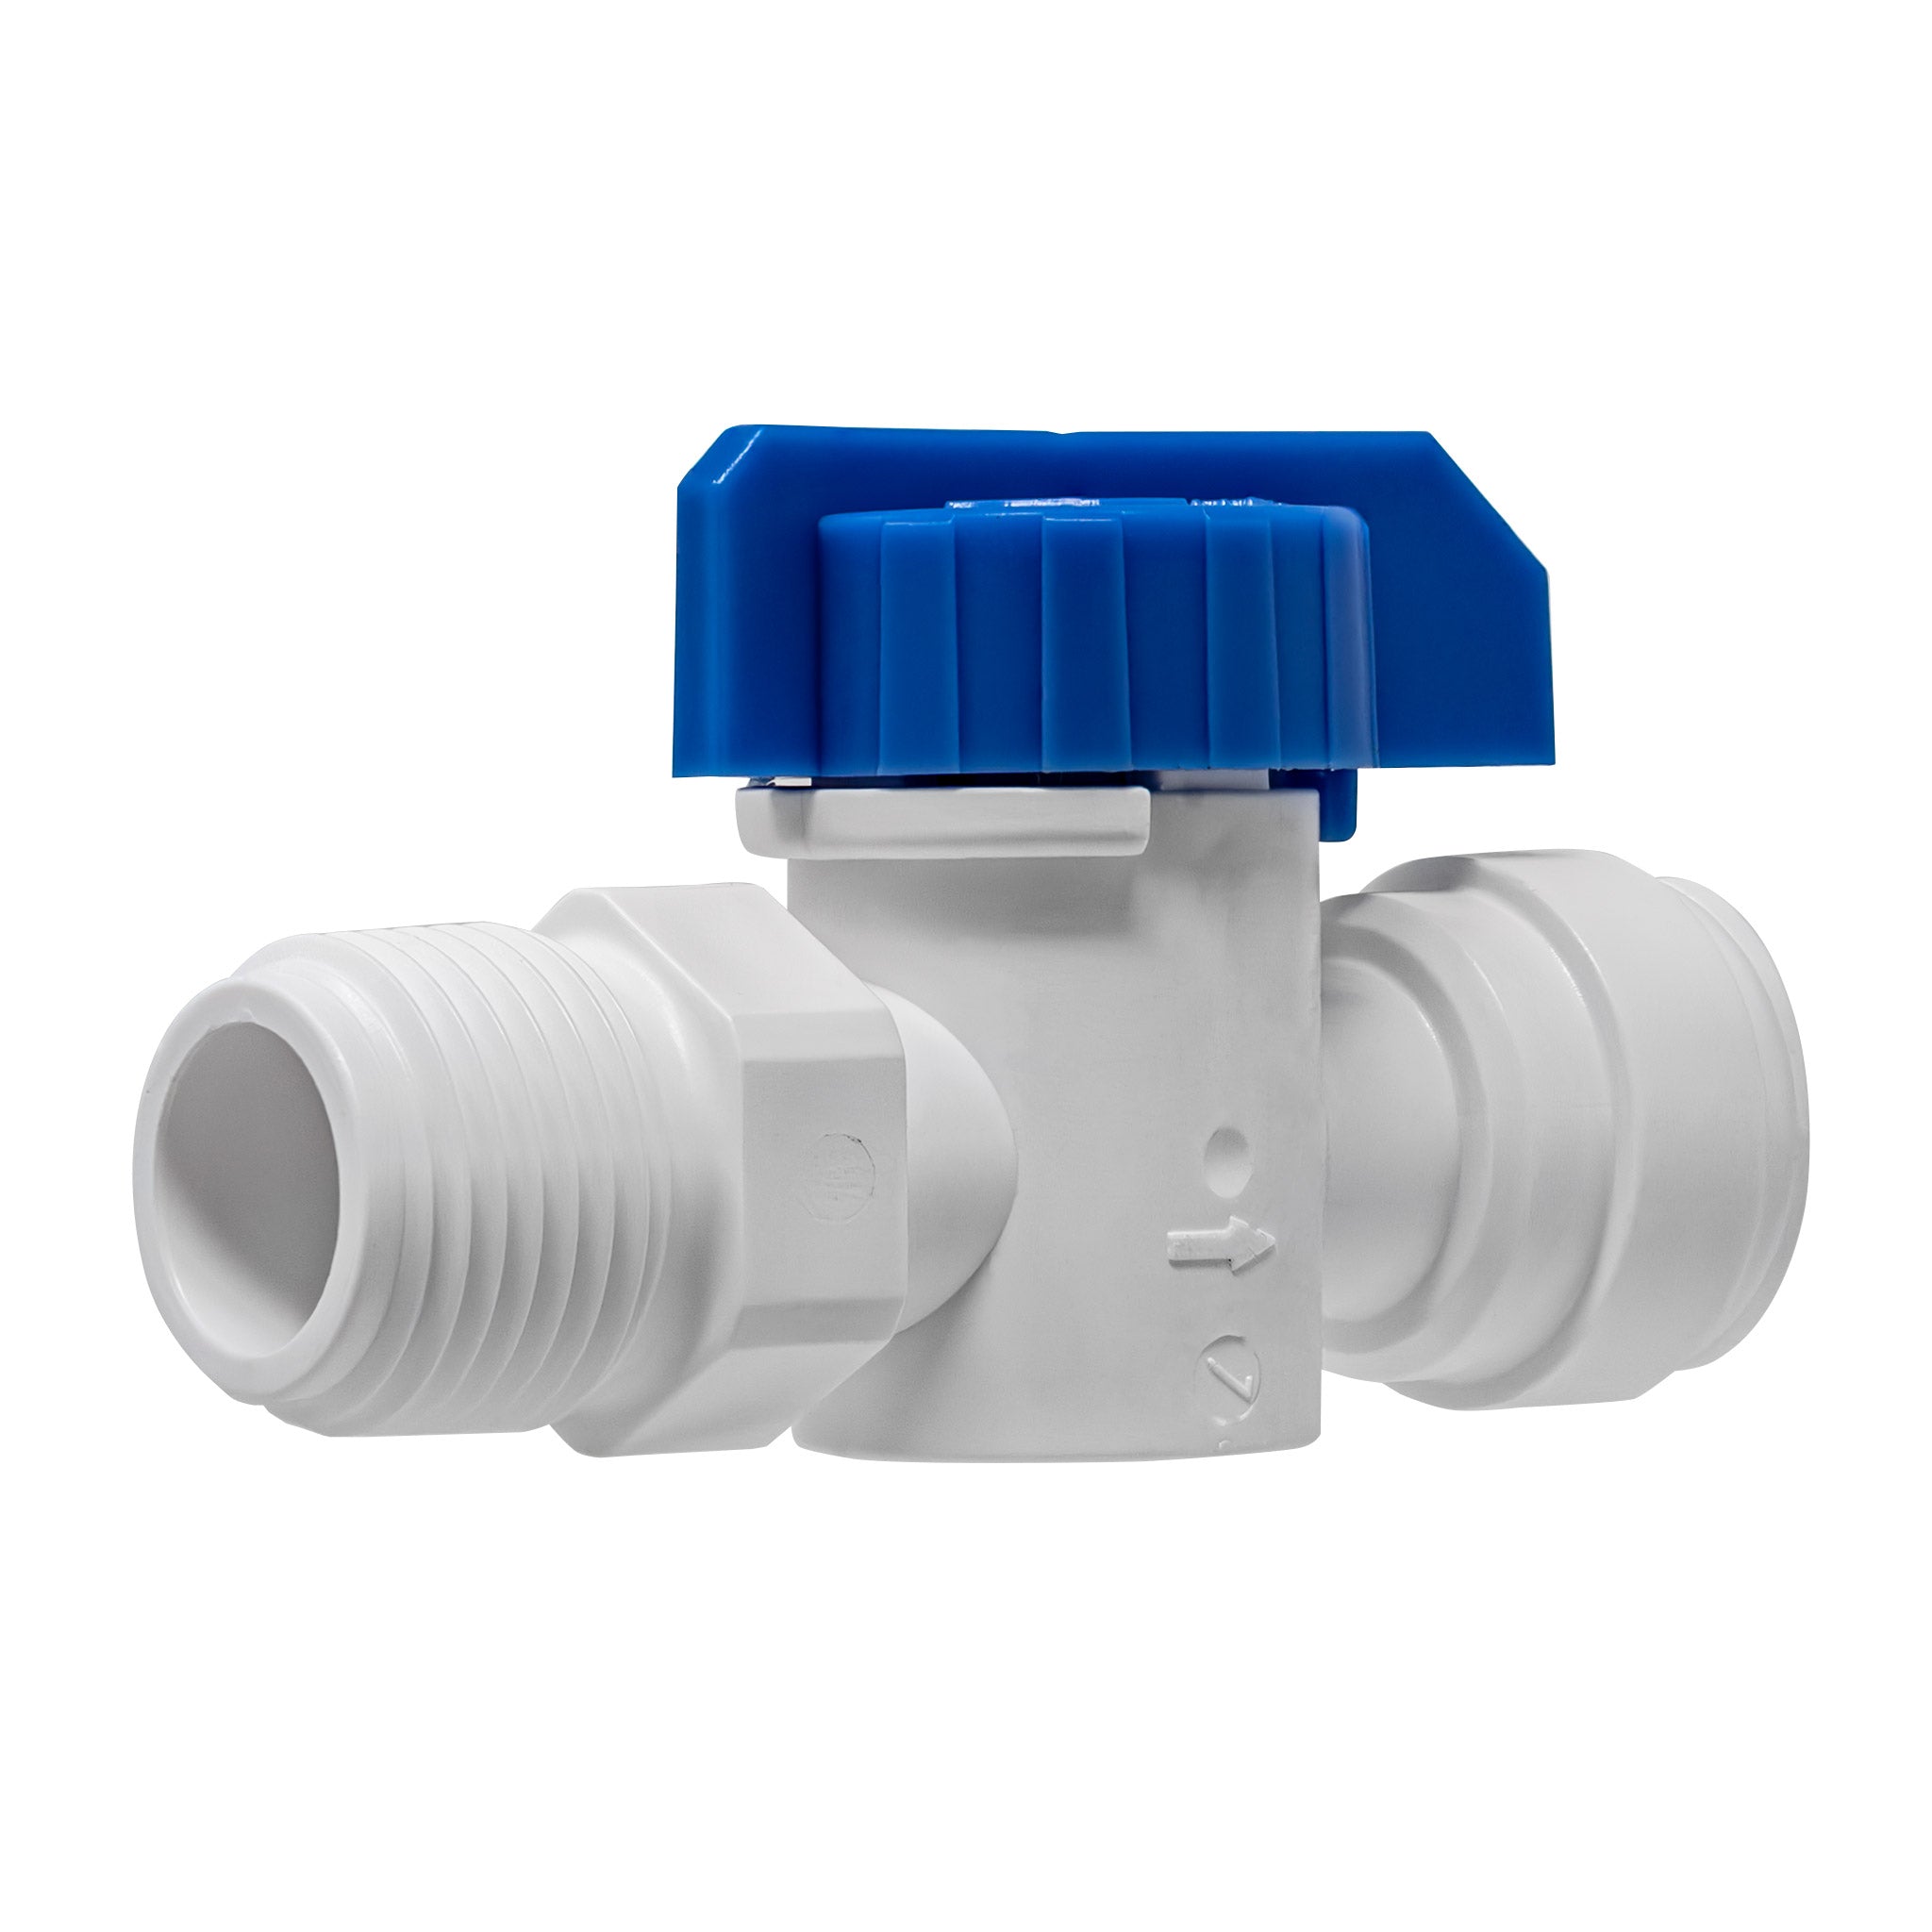 Quick connect in-line ball valve. 3/8" quick connect x 3/8" male thread.